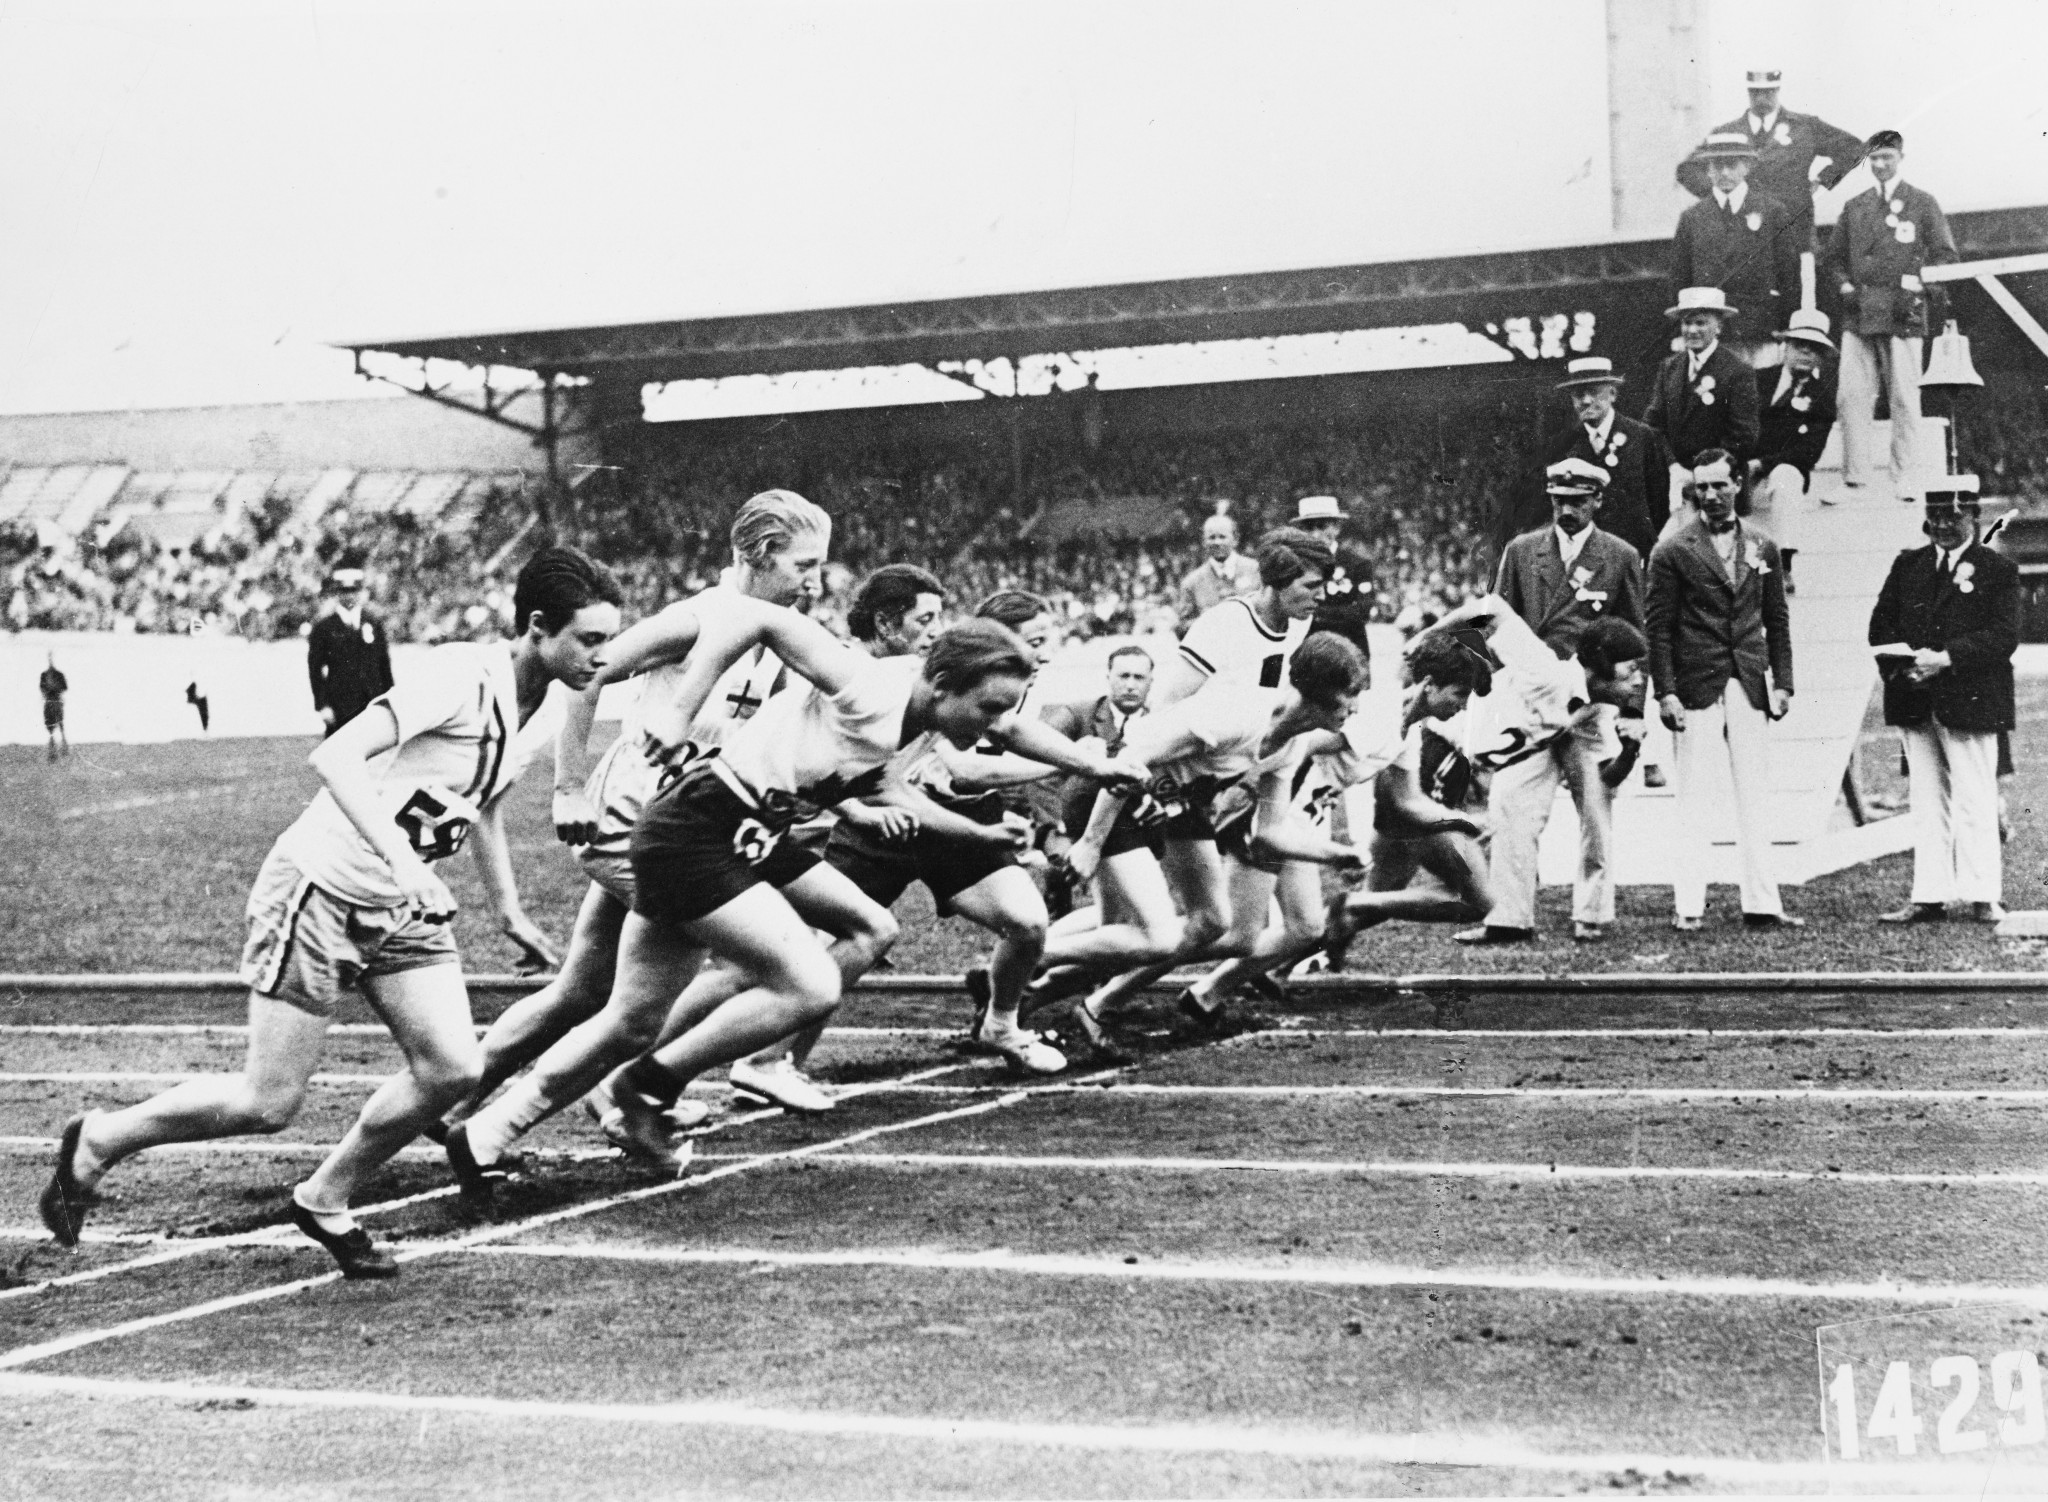  Women's athletics was finally introduced to the Olympics in 1928 but the longest distance was 800 metres ©Getty Images